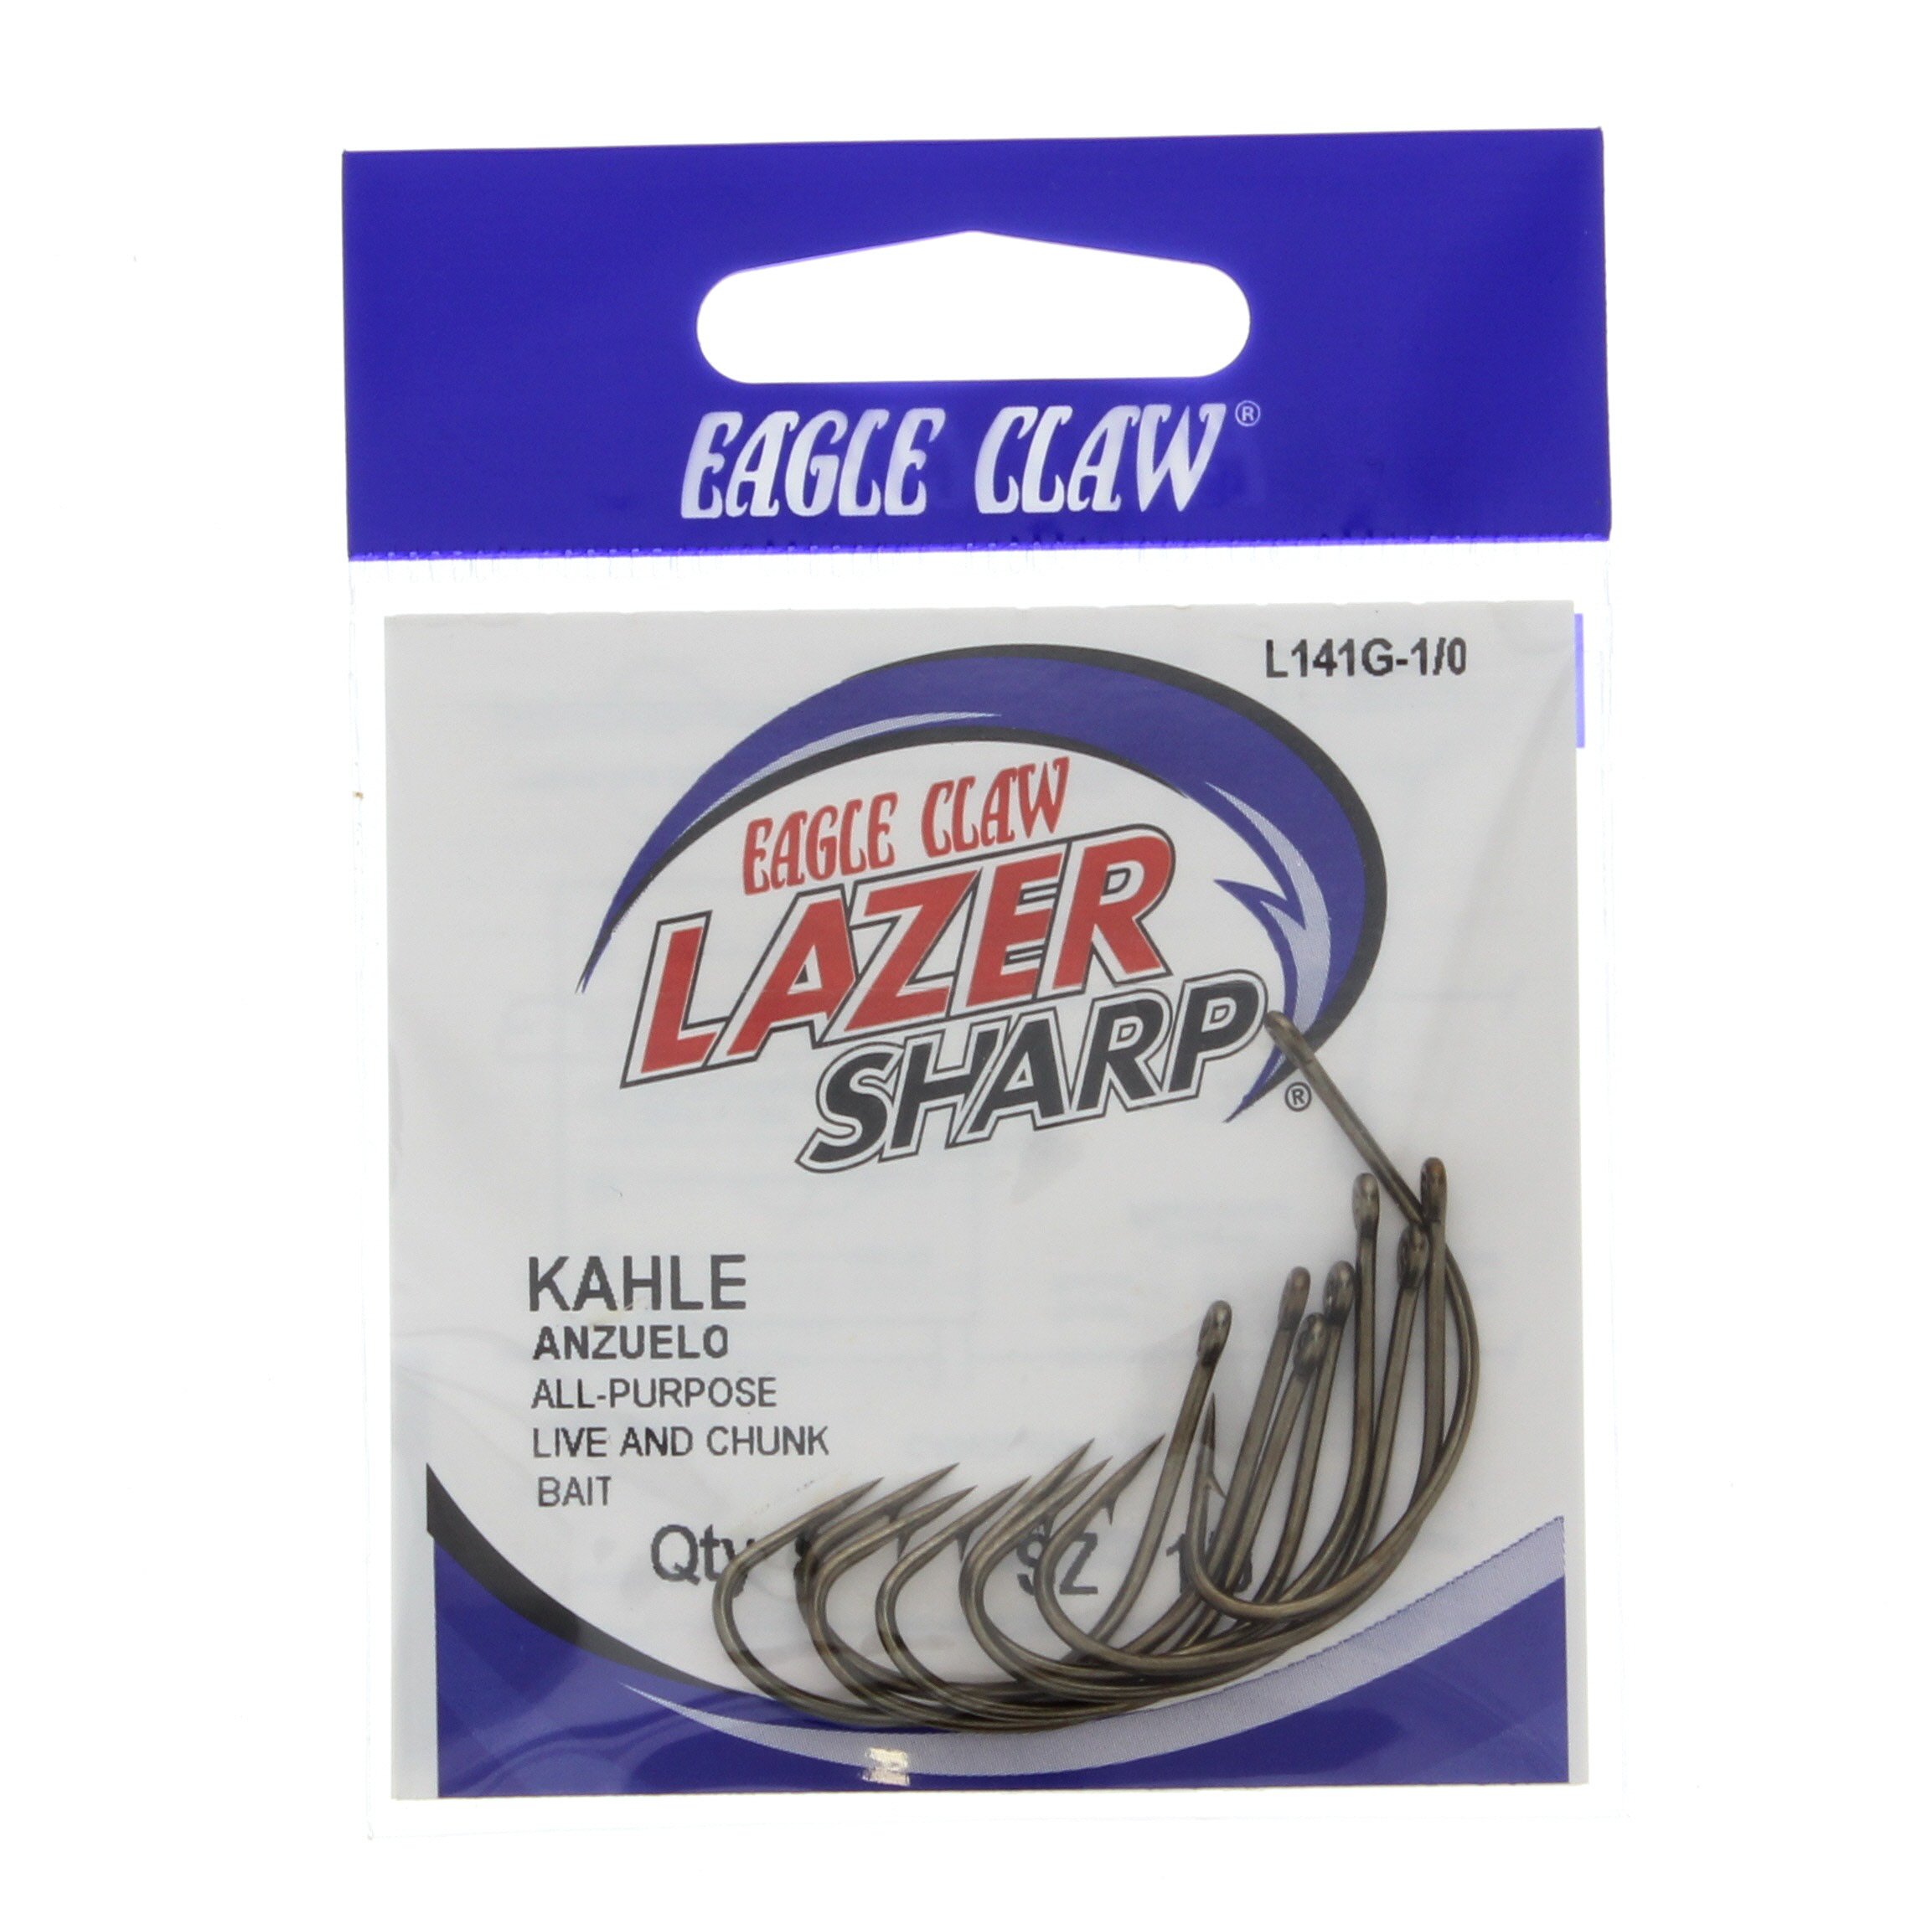 Eagle Claw L022RGH-1 Lazer Sharp Mr Crappie Re-Volve Fishing Hook Size 1 